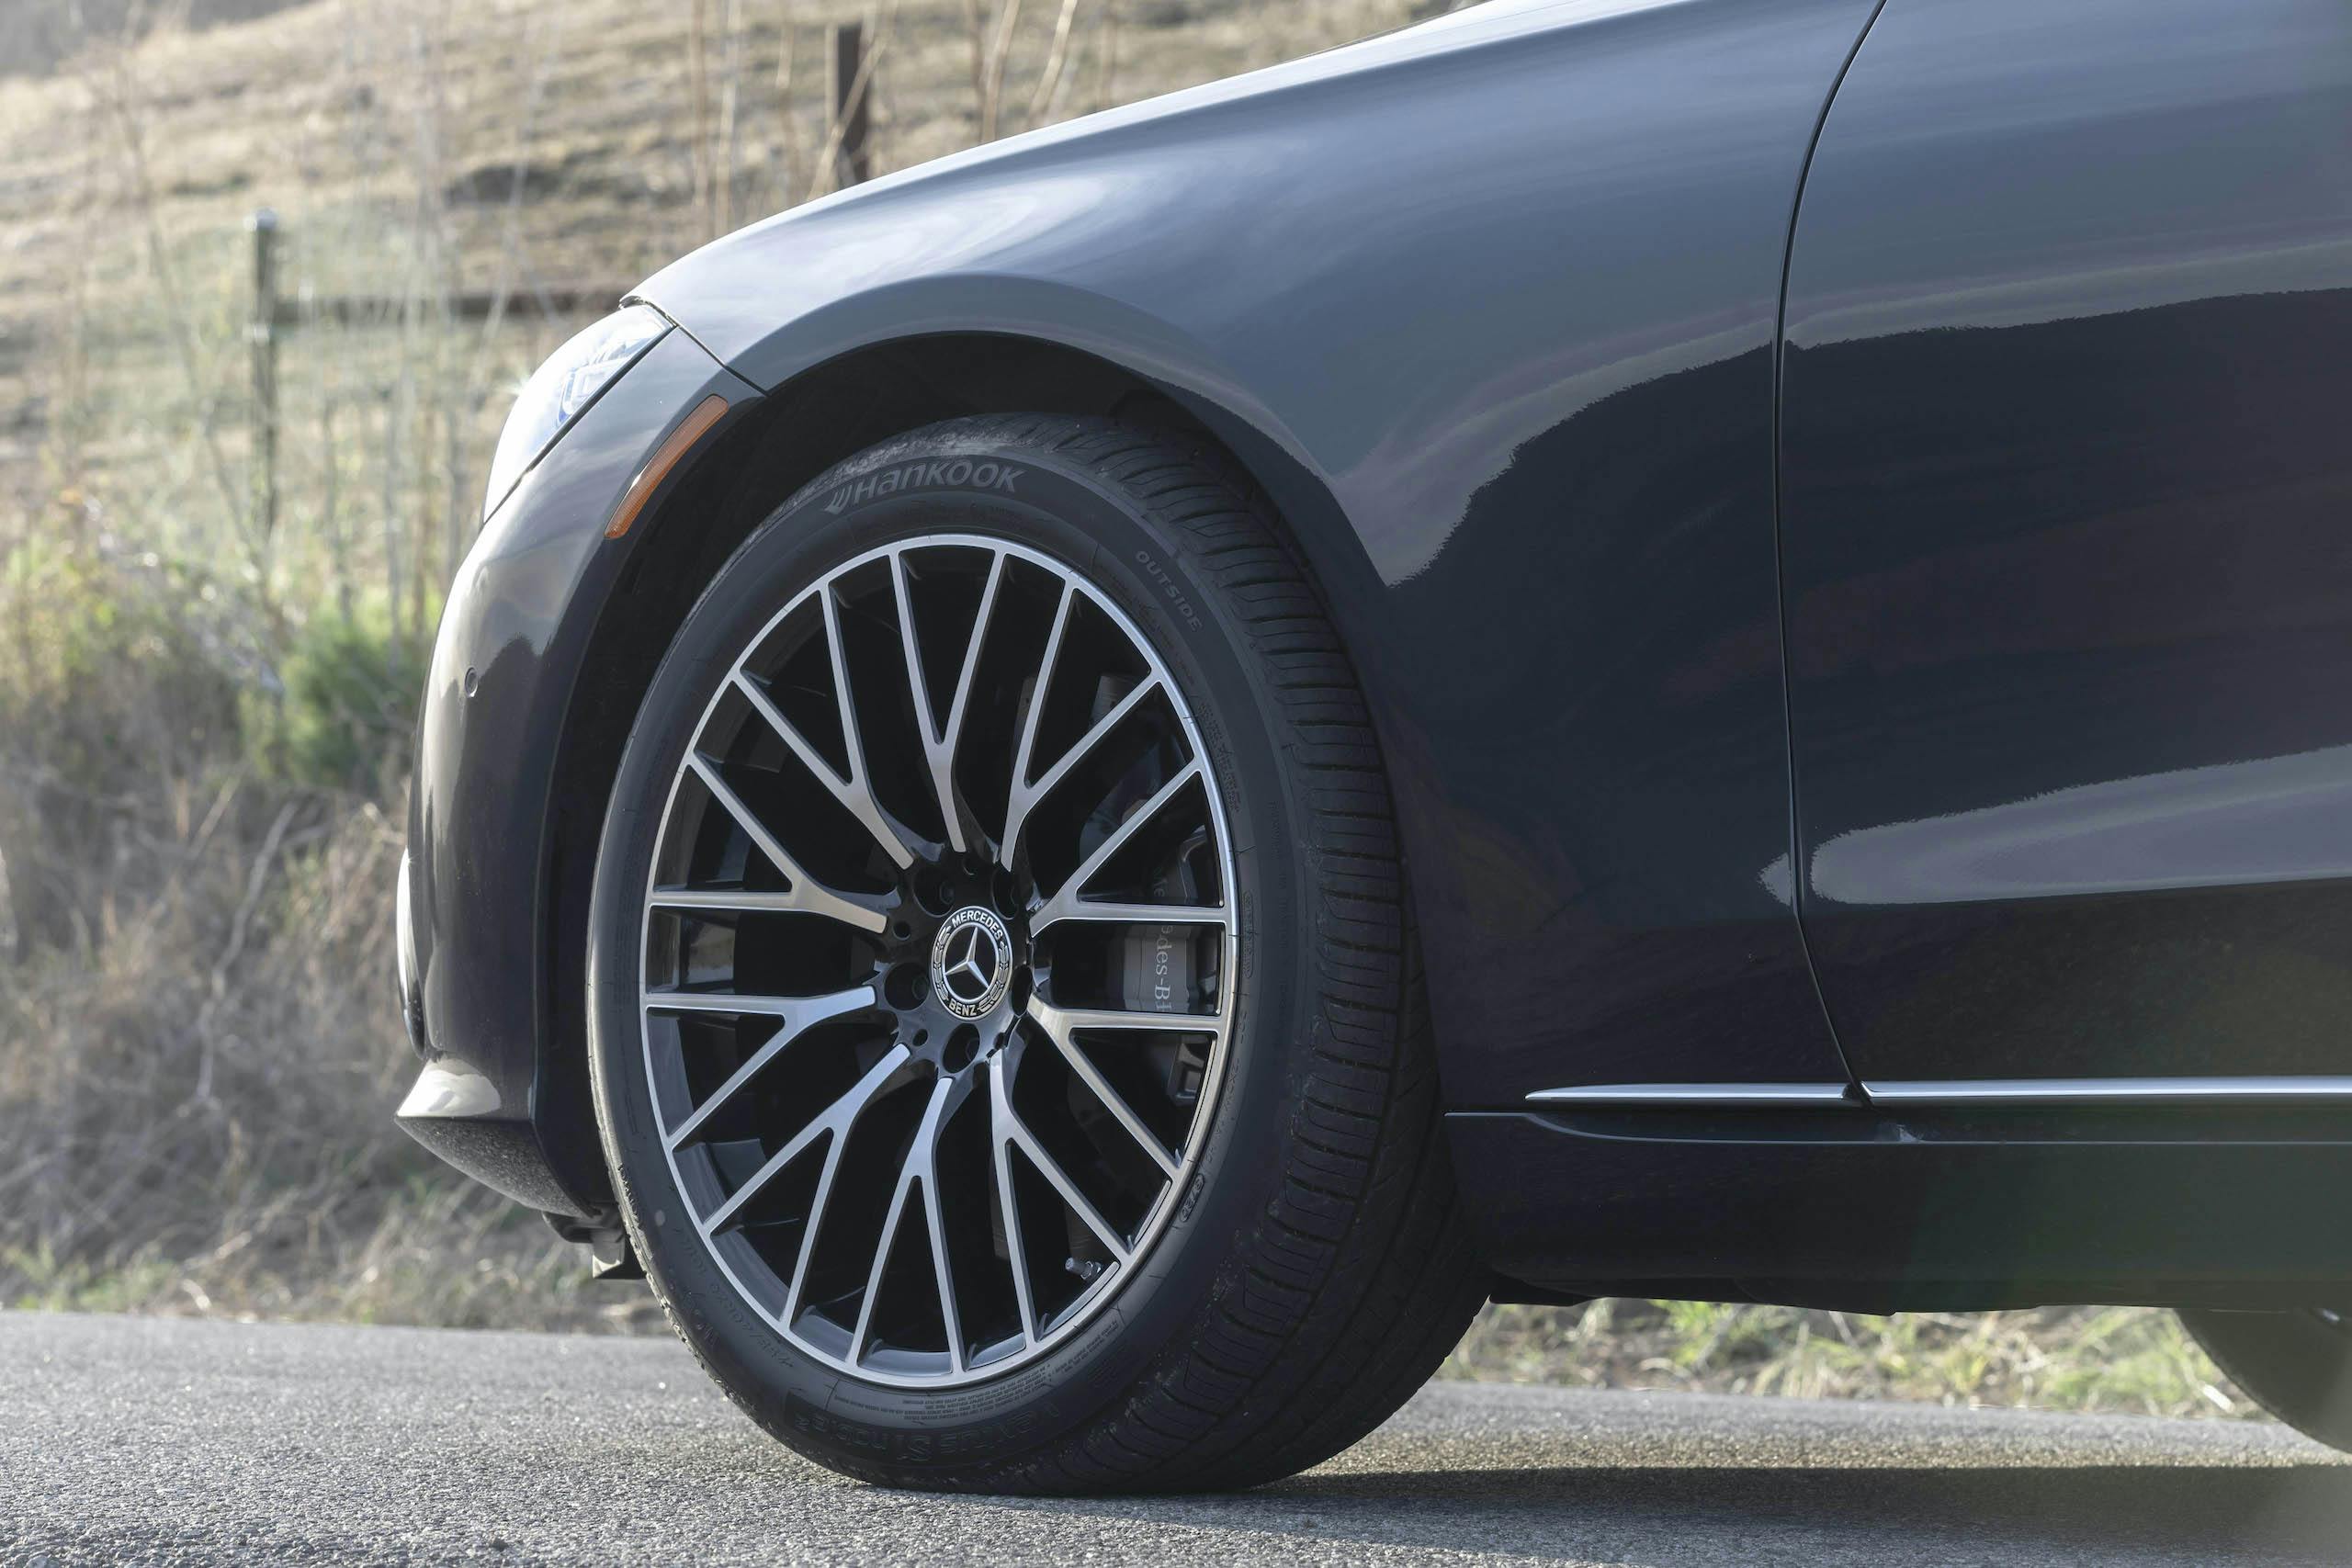 Mercedes Benz-S-Class front wheel and tire